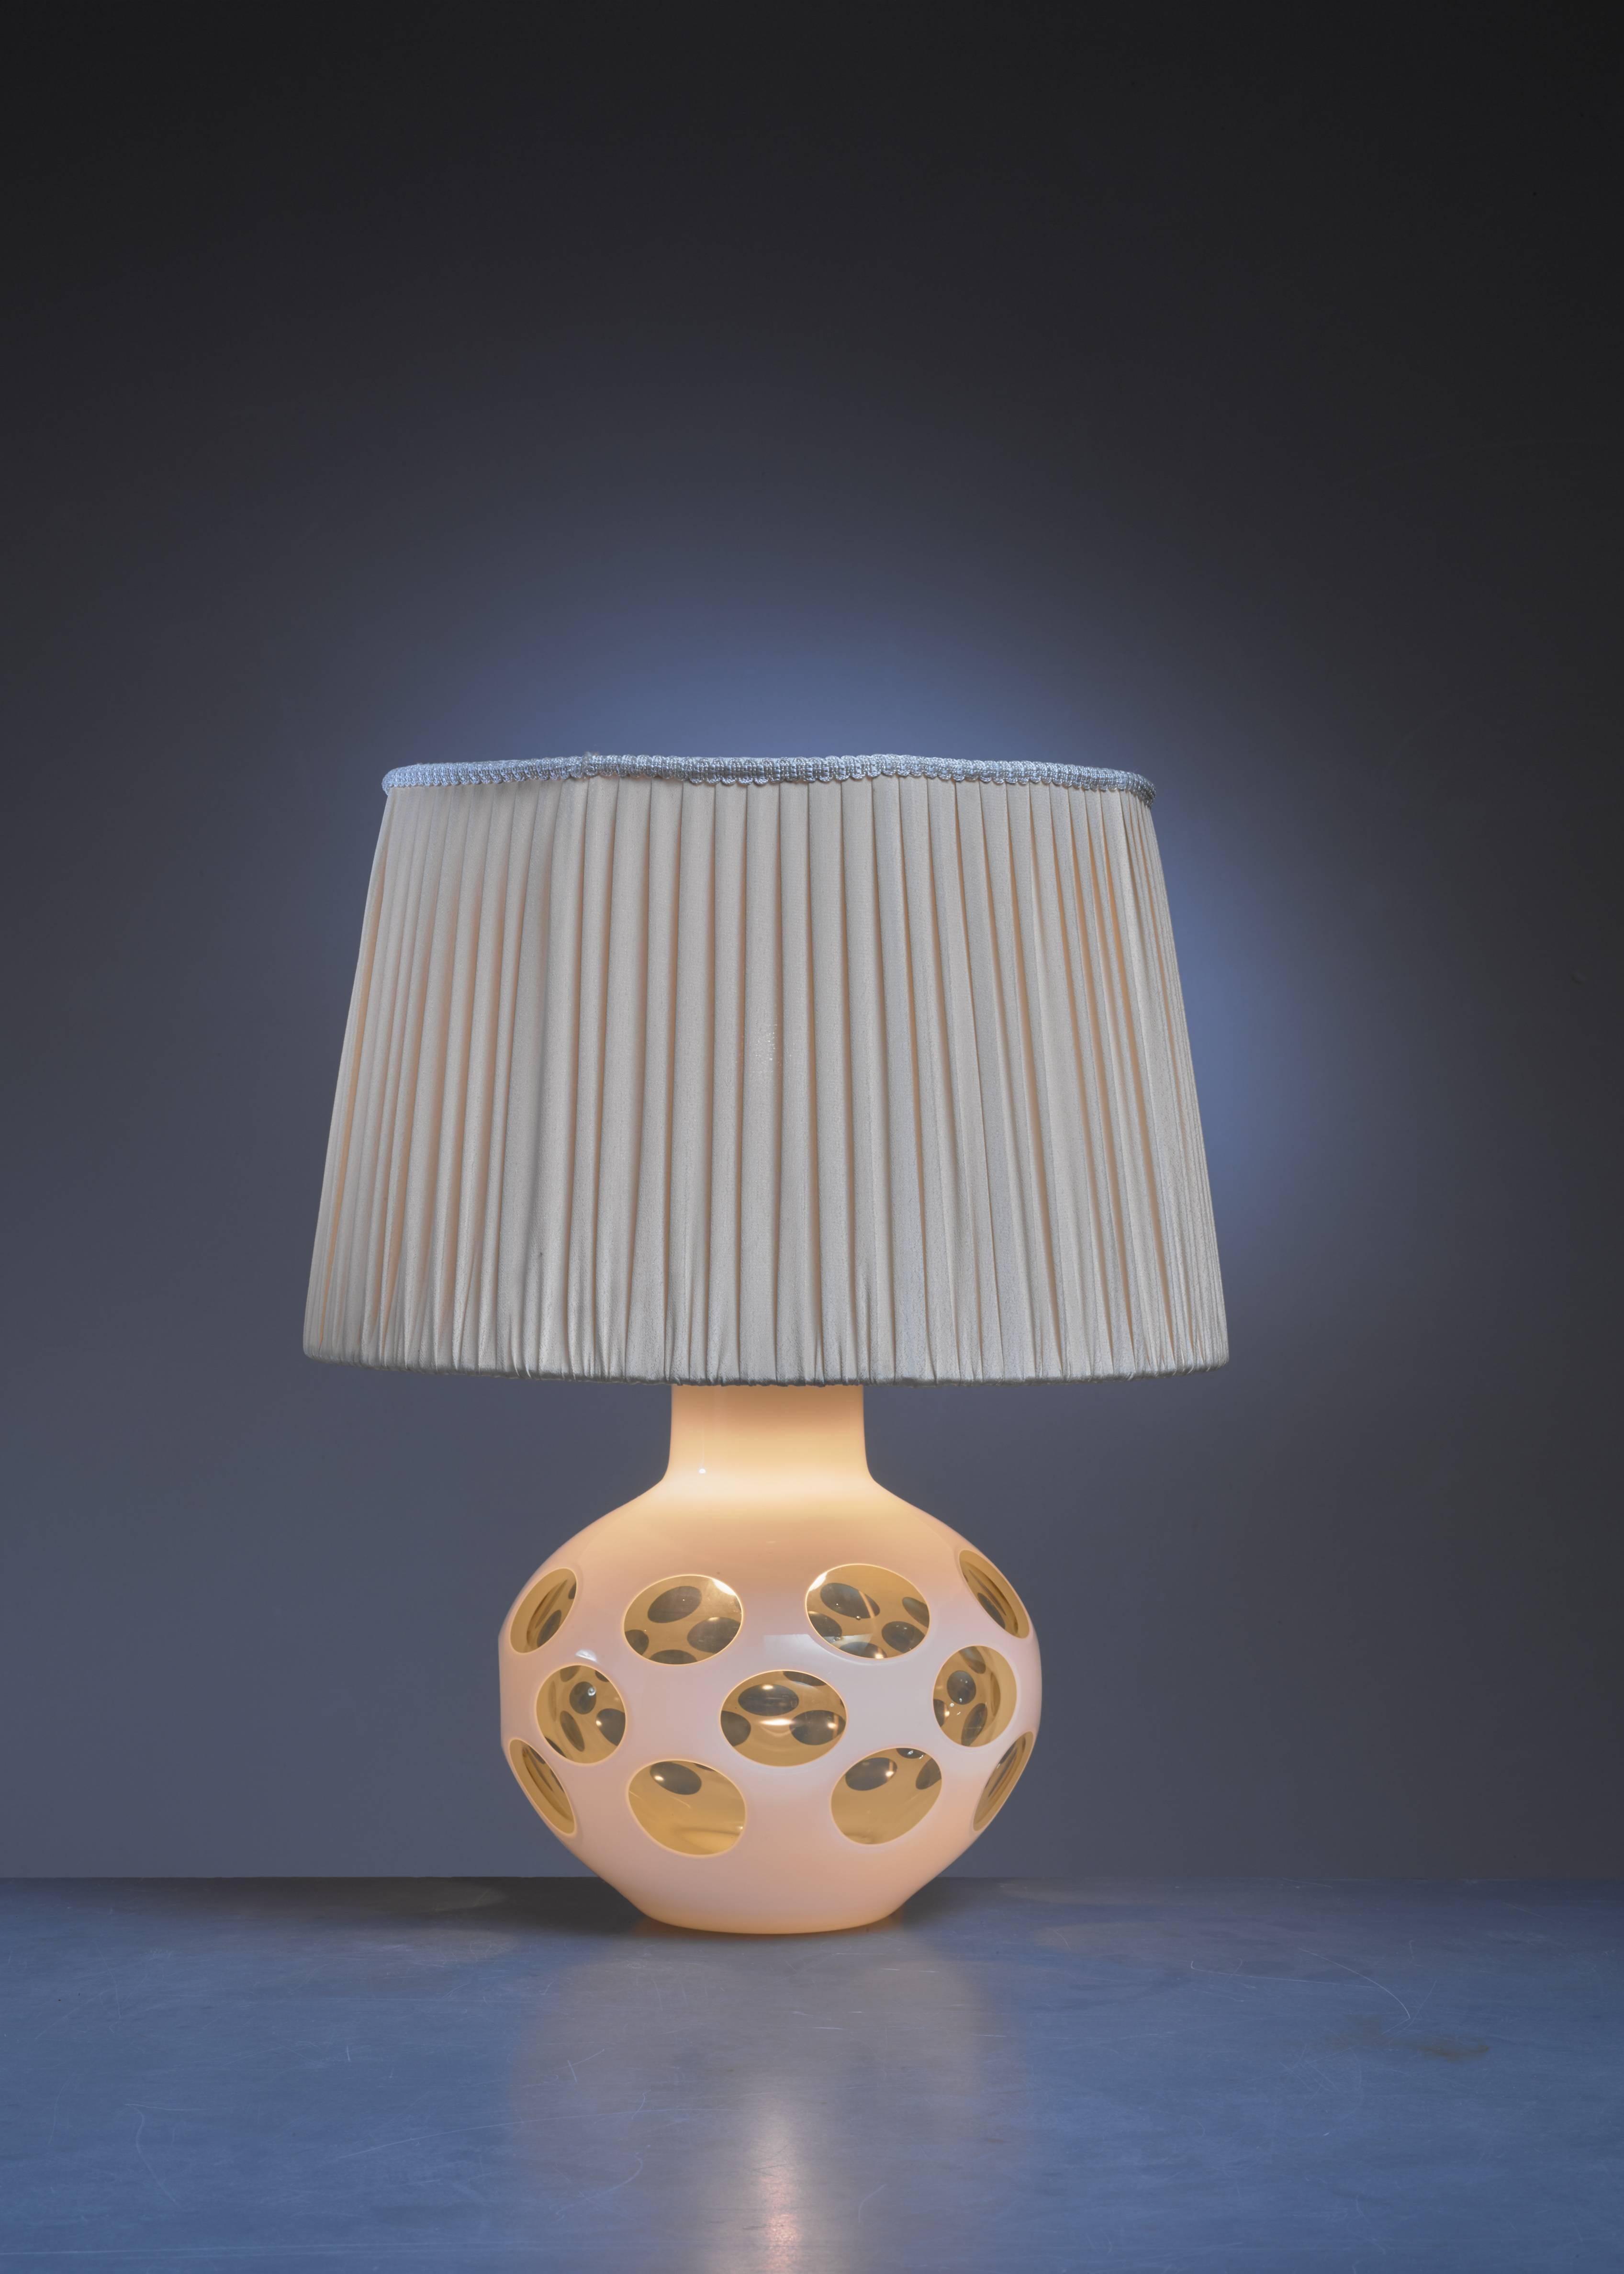 A table lamp by Carlo Nason for Mazzega. The lamp is made of a yellow glass base, painted white with transparent parts, with a brass fitting on top. Inside the base is a small lamp.

The measurements and shipping cost stated are of the lamp without